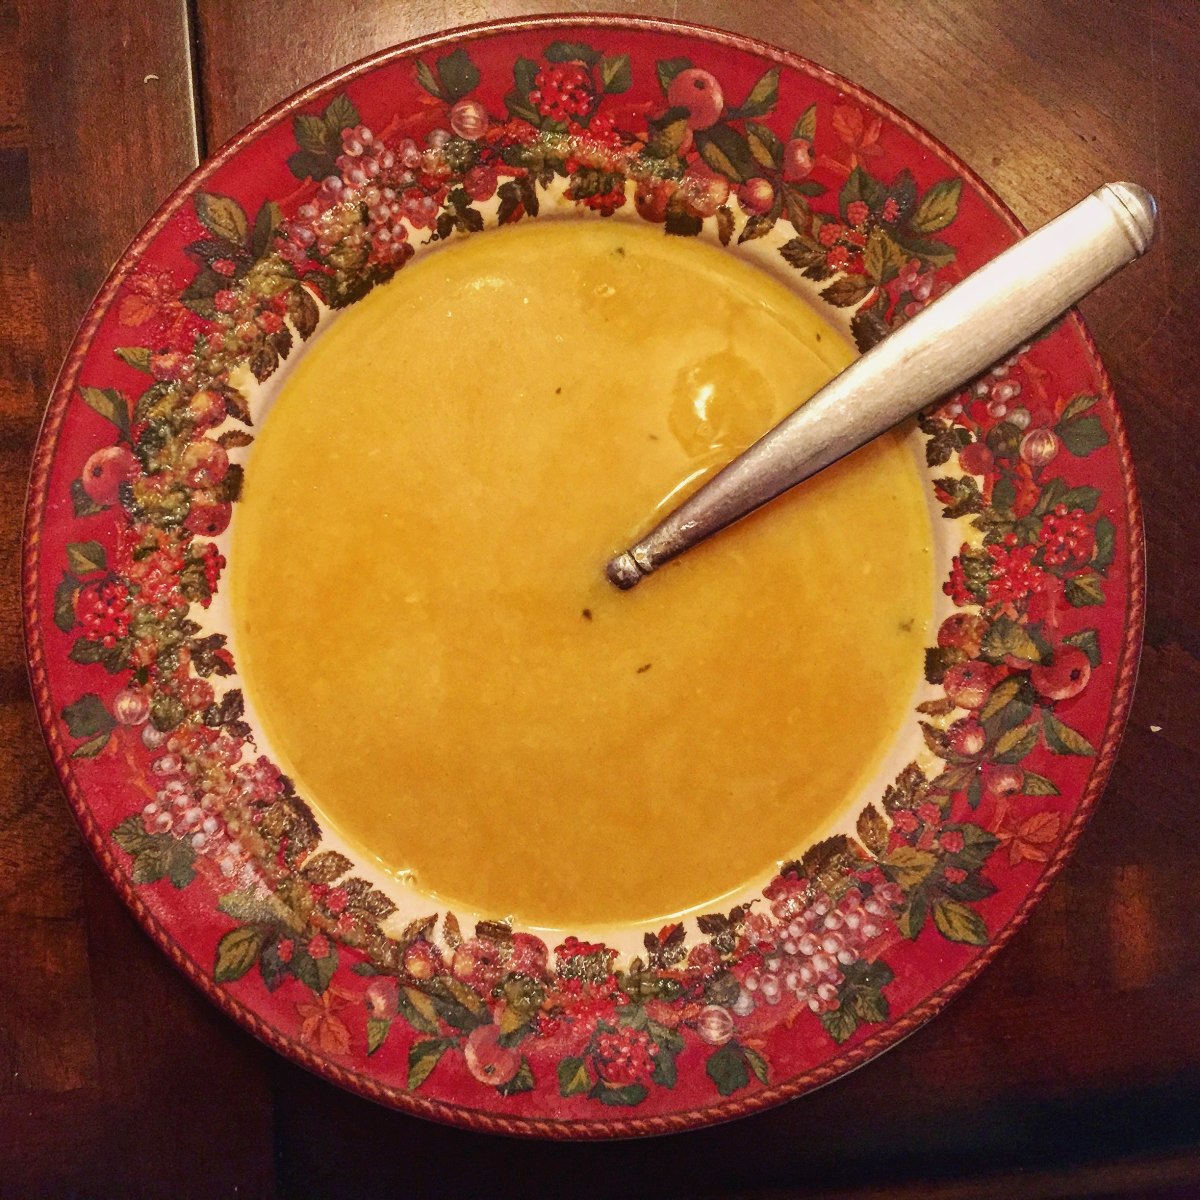 Creamy and Savory Butternut Squash Soup